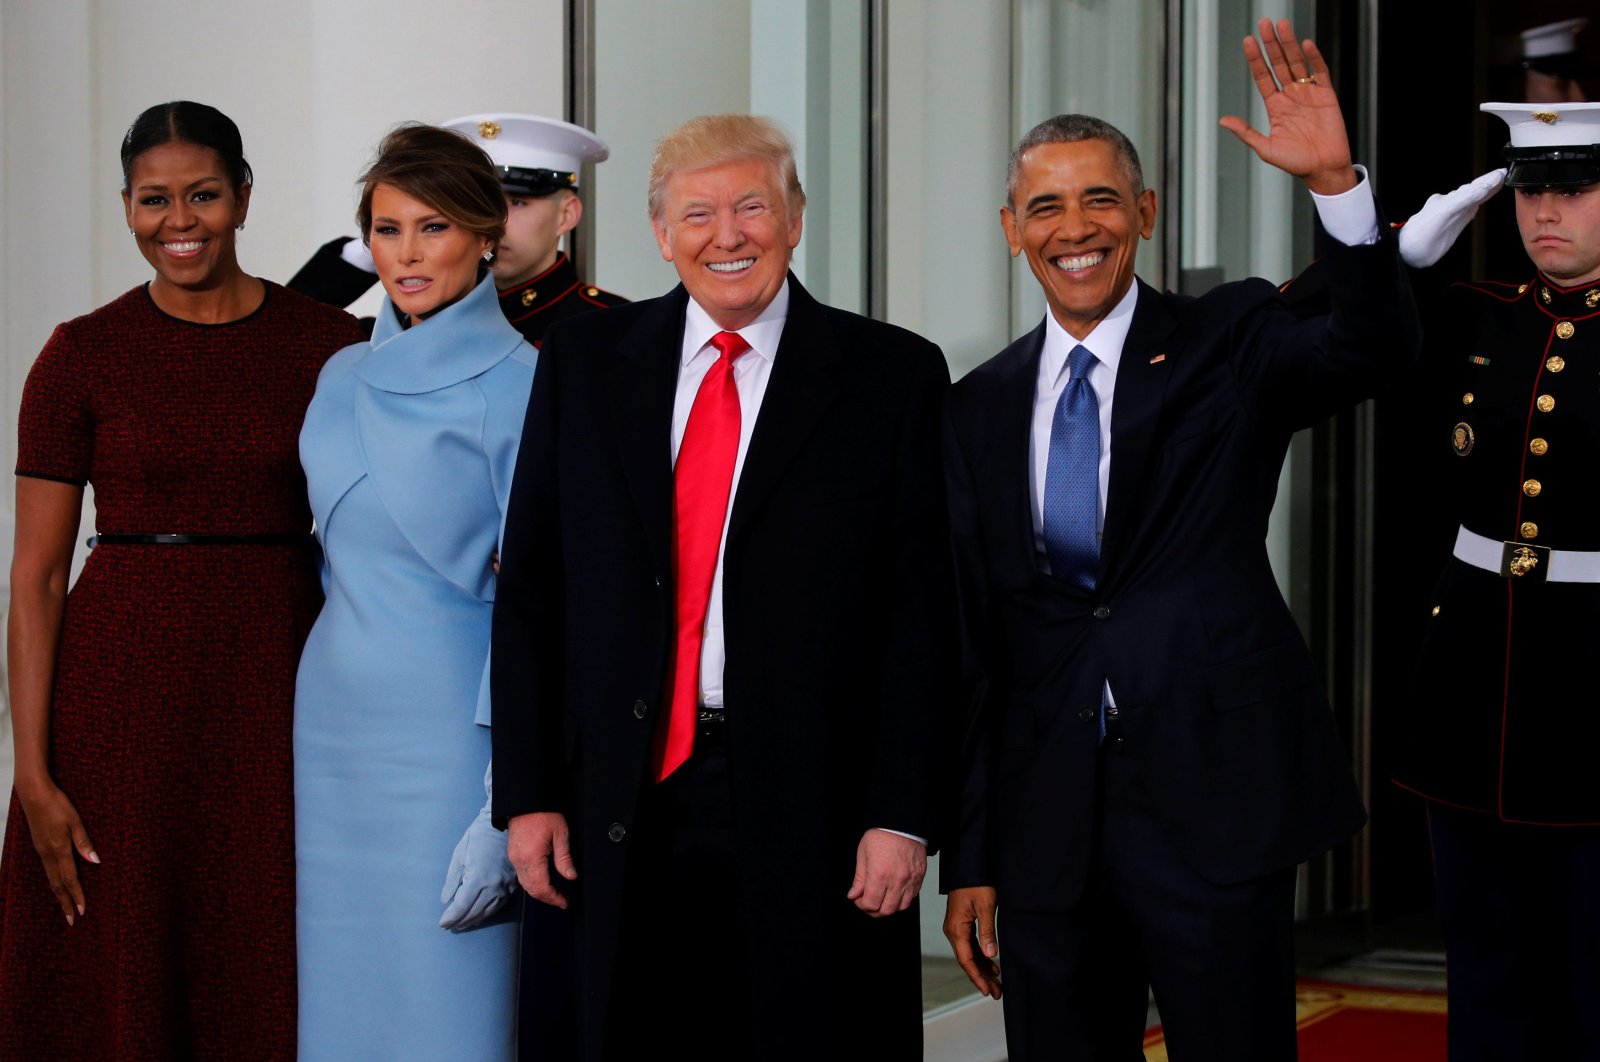 U.S. President Barack Obama (R) and first lady Michelle Obama (L) greet U.S. President-elect Donald Trump and his wife Melania for tea before the inauguration at the White House in Washington, U.S. January 20, 2017. (Reuters Photo)